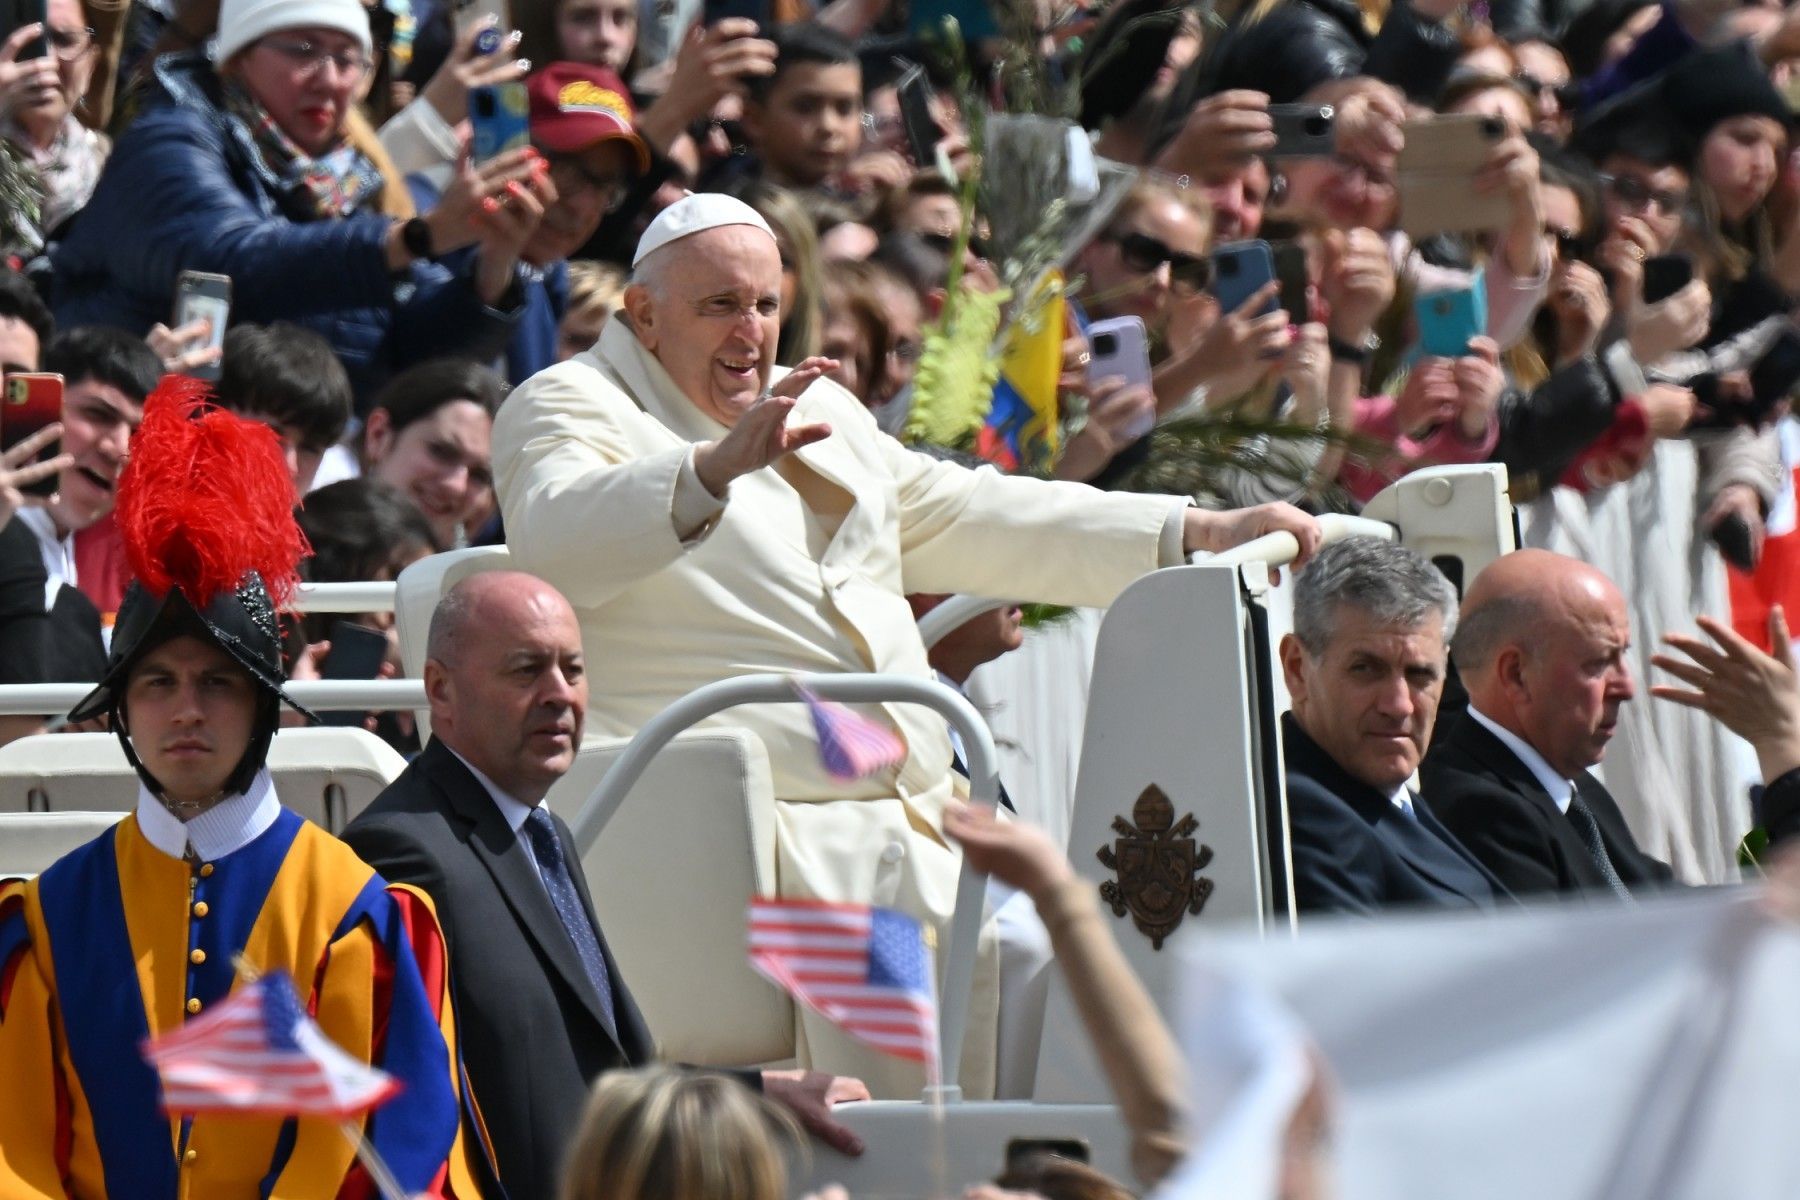 Pope thanks well-wishers after illness, presides over mass